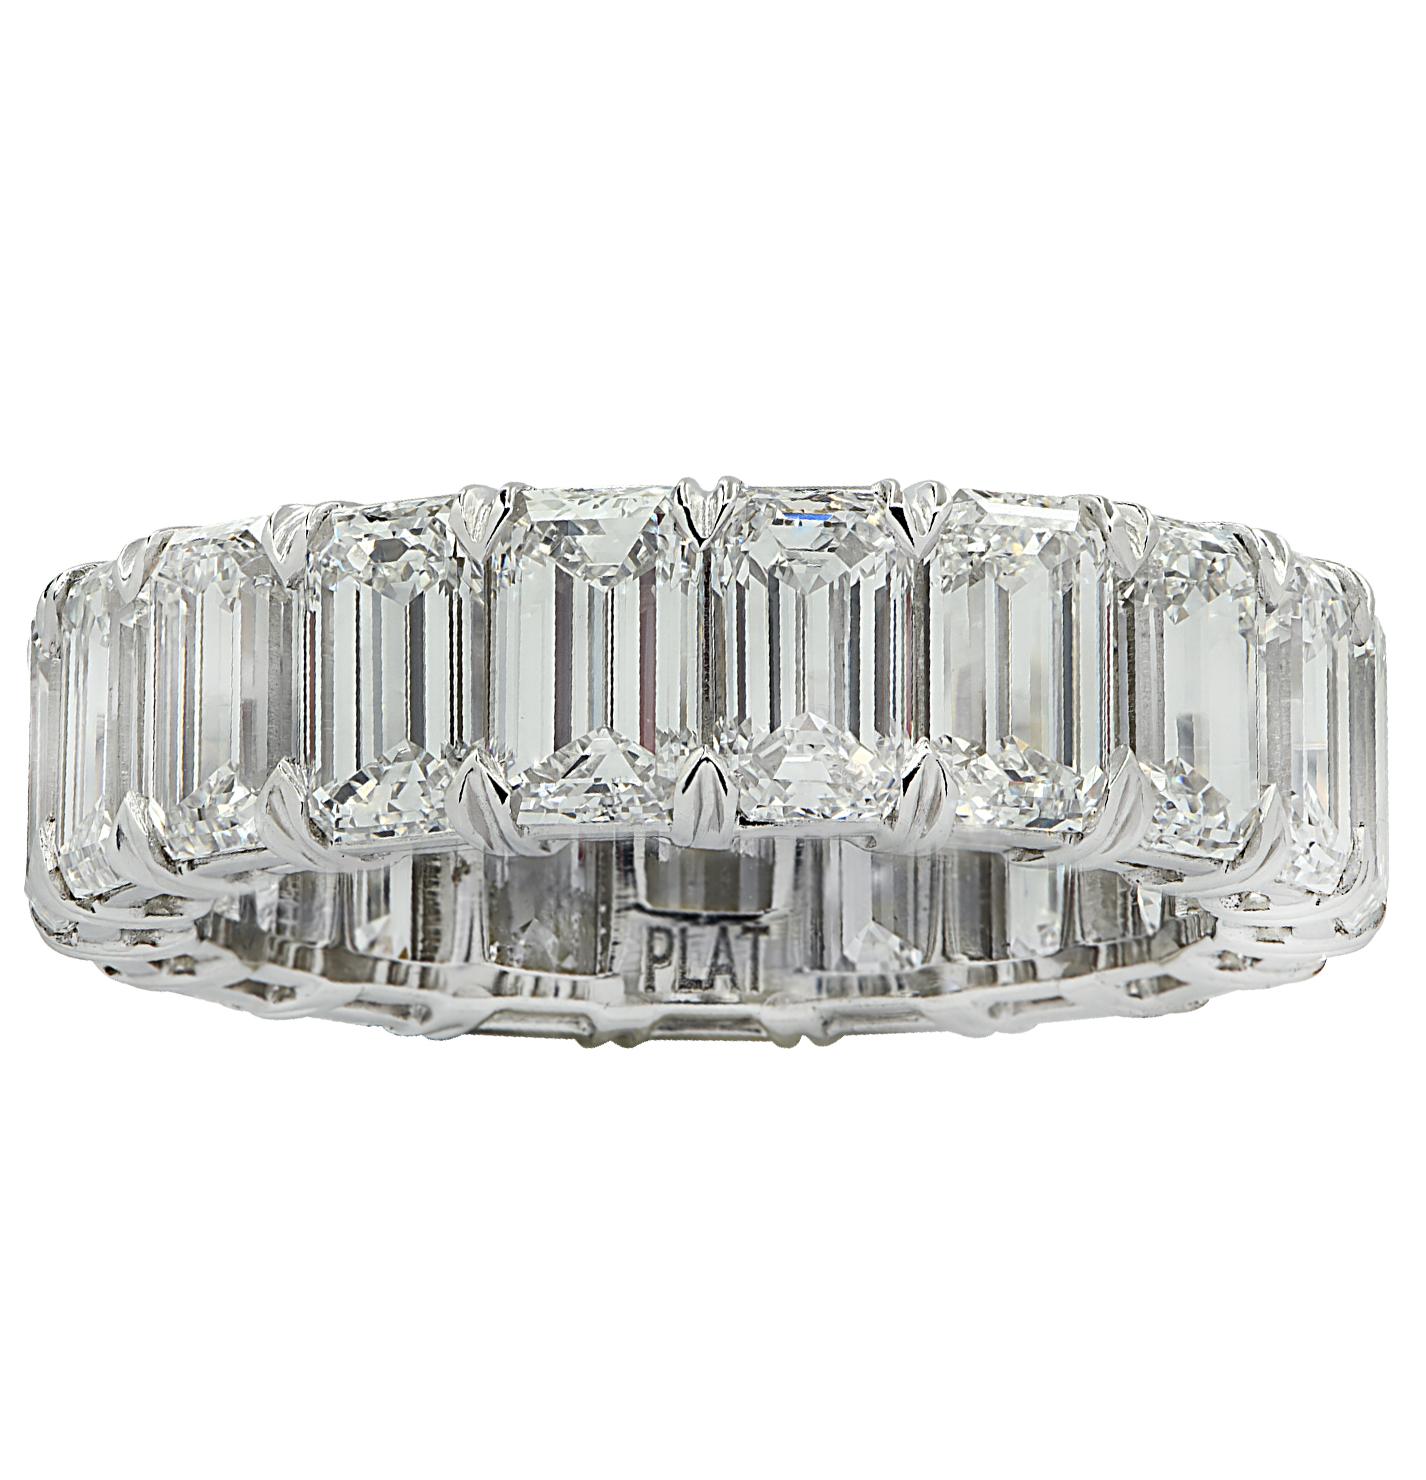 Exquisite Vivid Diamonds eternity band crafted in Platinum, showcasing 19 stunning GIA Certified emerald cut diamonds weighing 7.68 carats total, D-F color, VVS-VS clarity. Each diamond was carefully selected, perfectly matched and set in a seamless